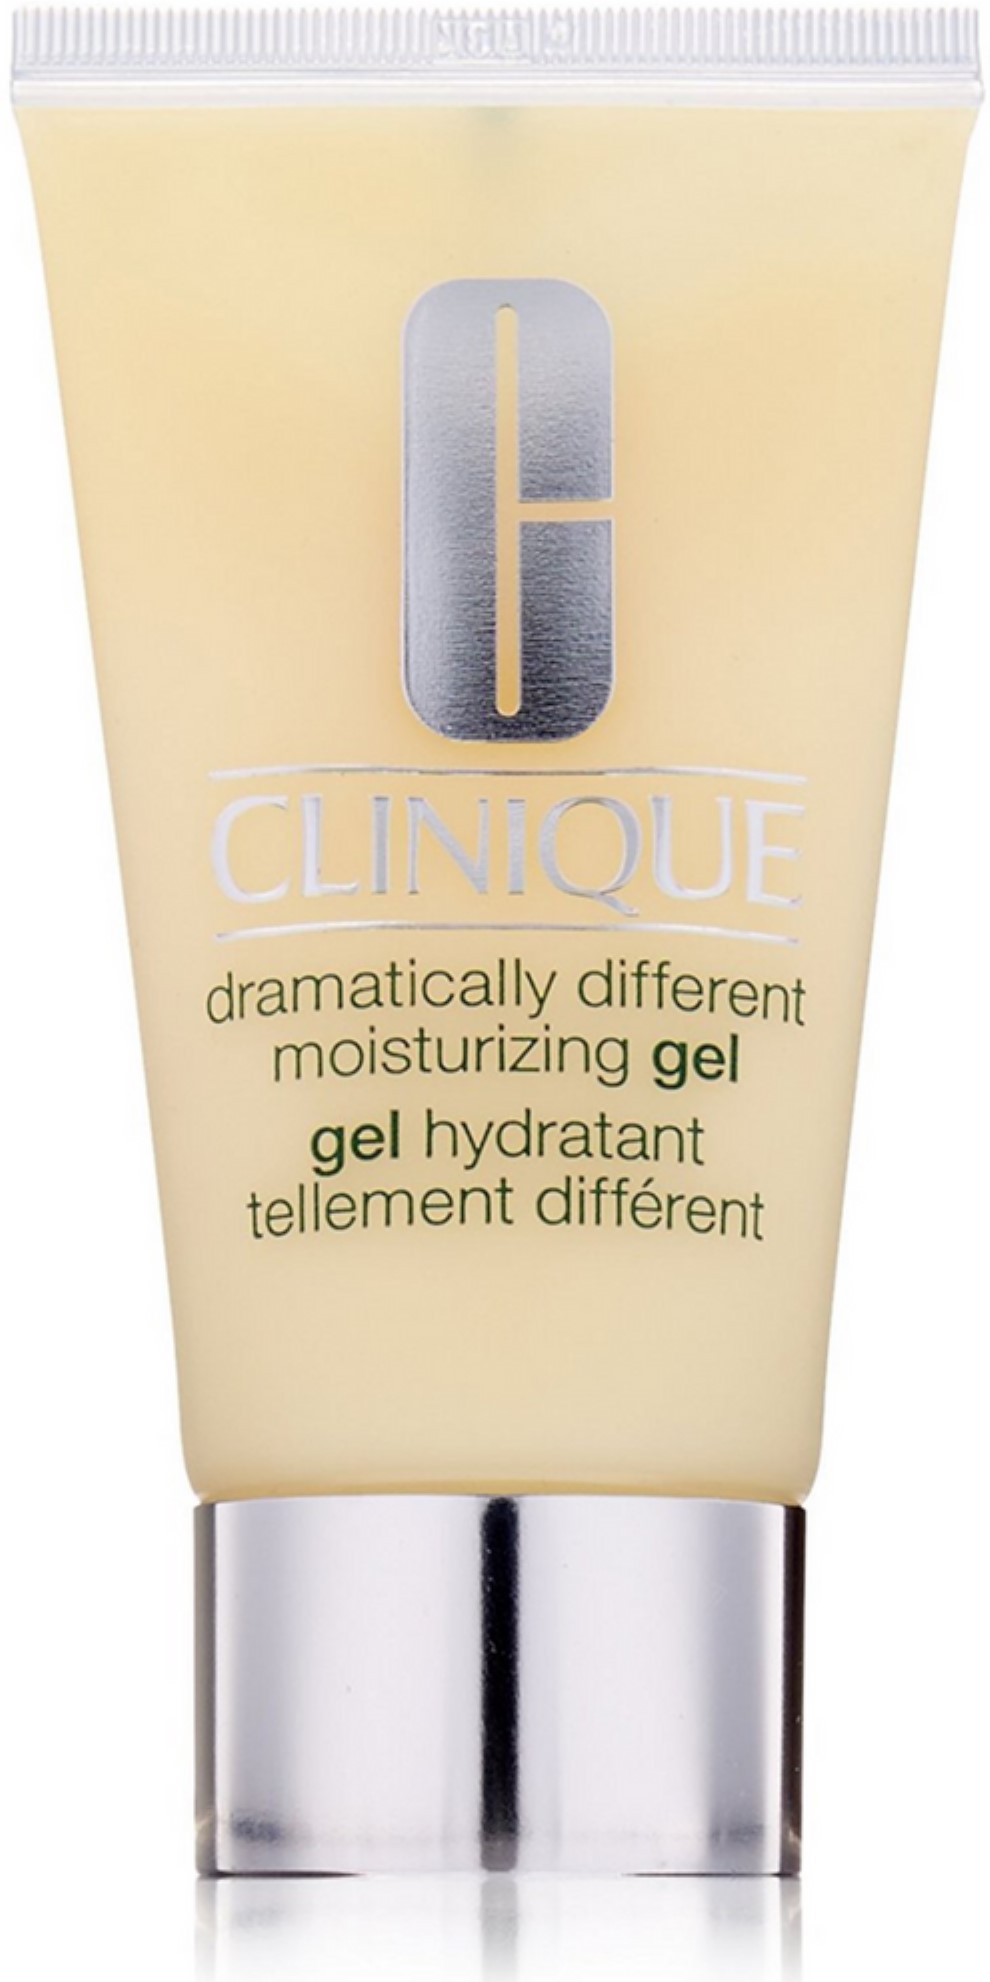 Clinique By Dramatically Different Moisturizing Gel In Tube 1.7 Oz